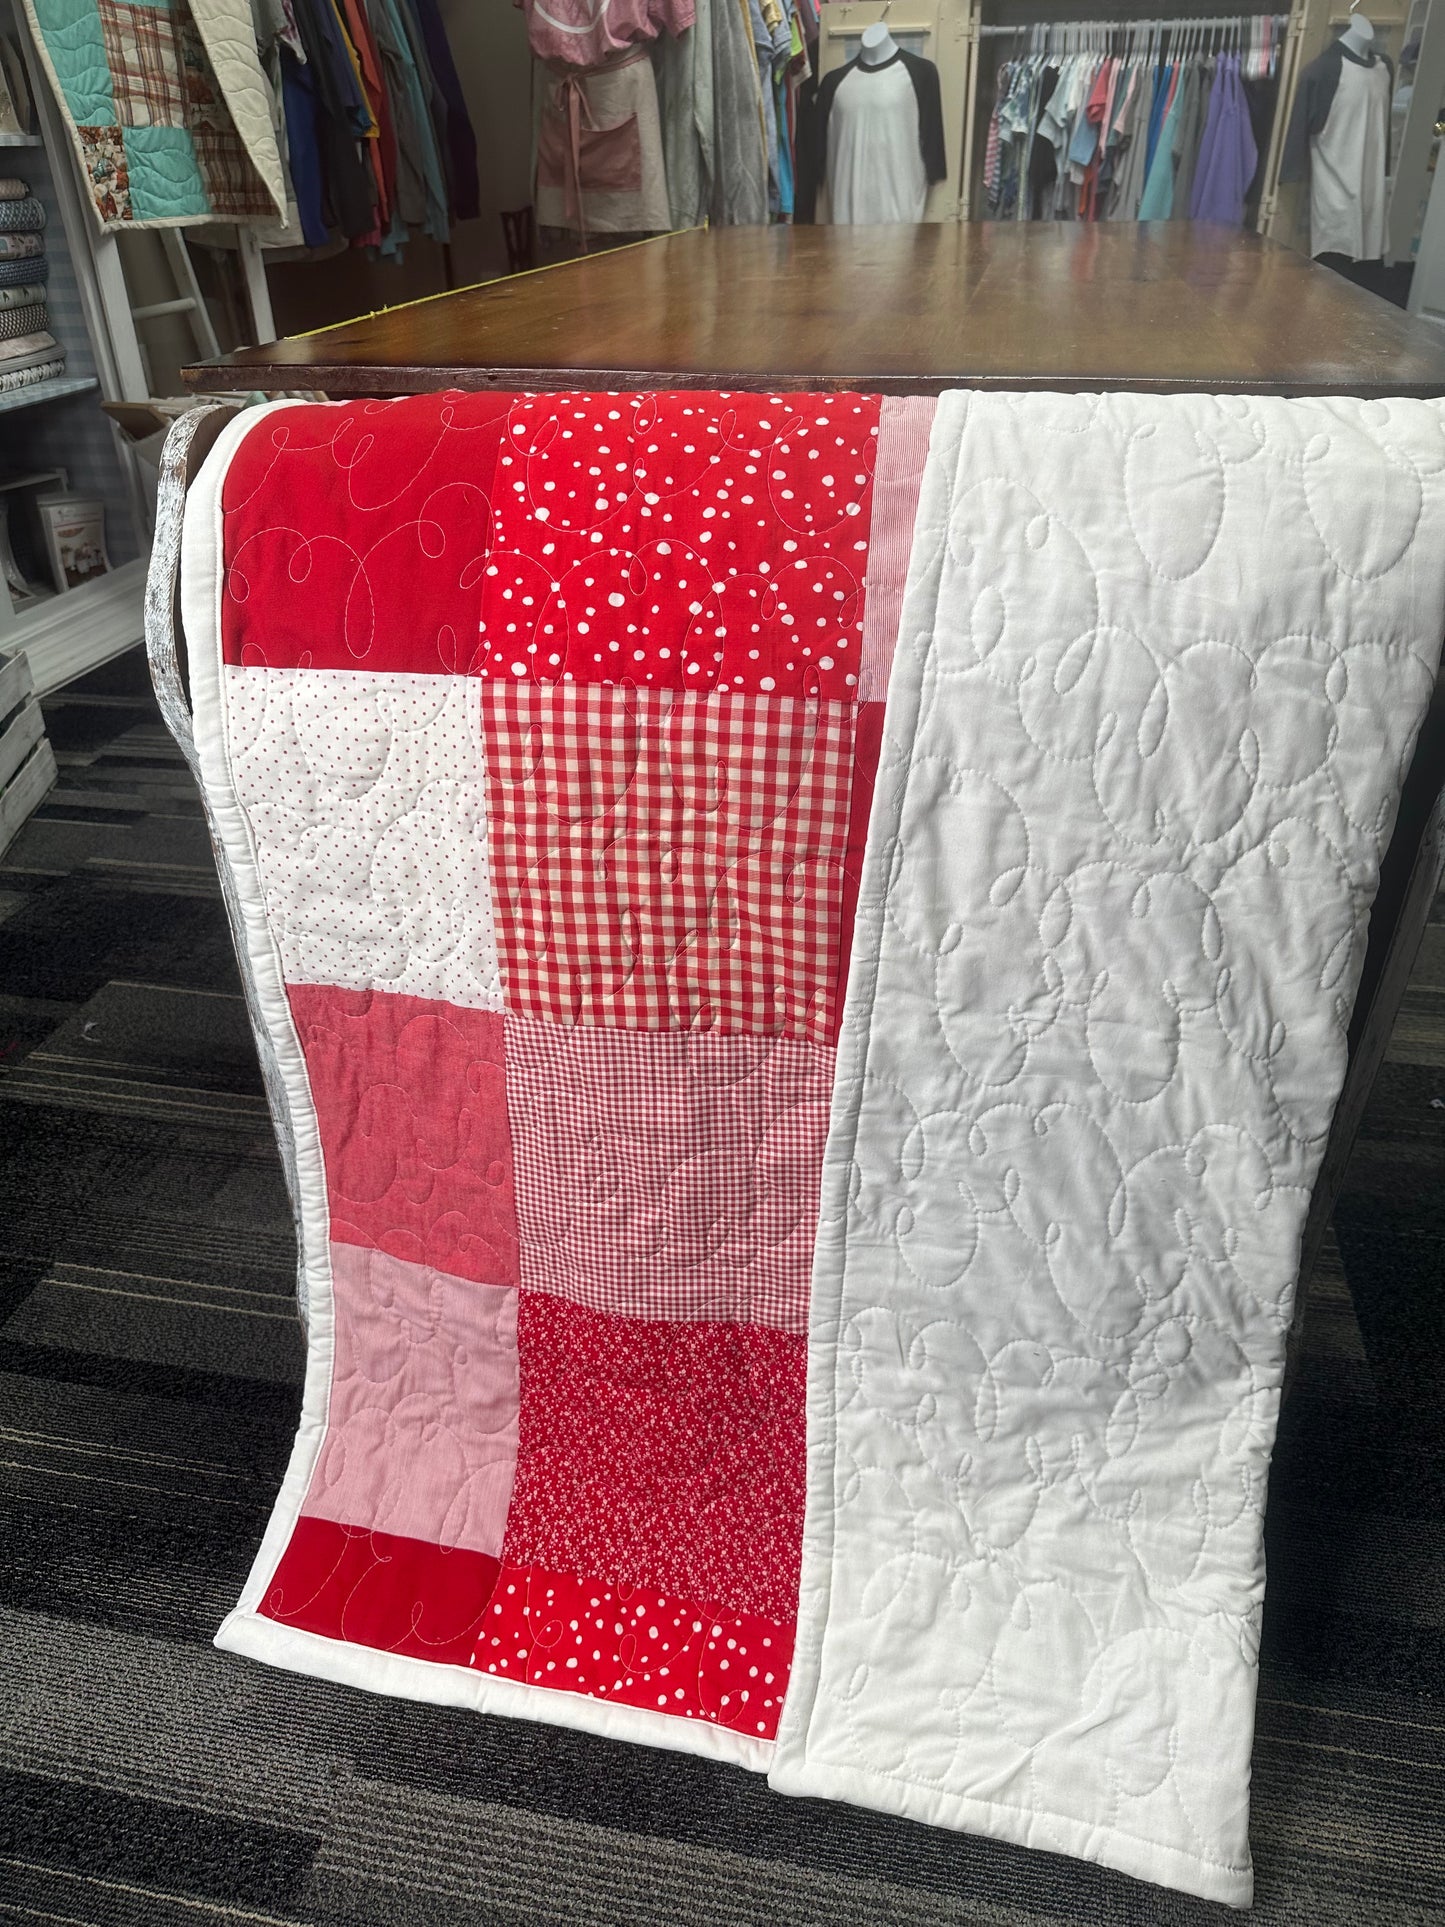 Red and White Patch Work Quilt